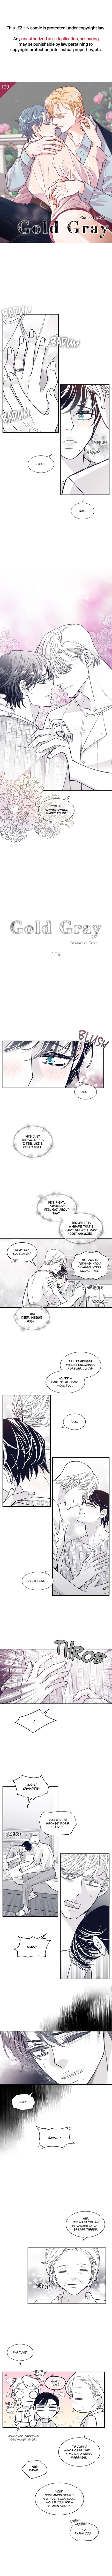 Gold Gray - Page 1